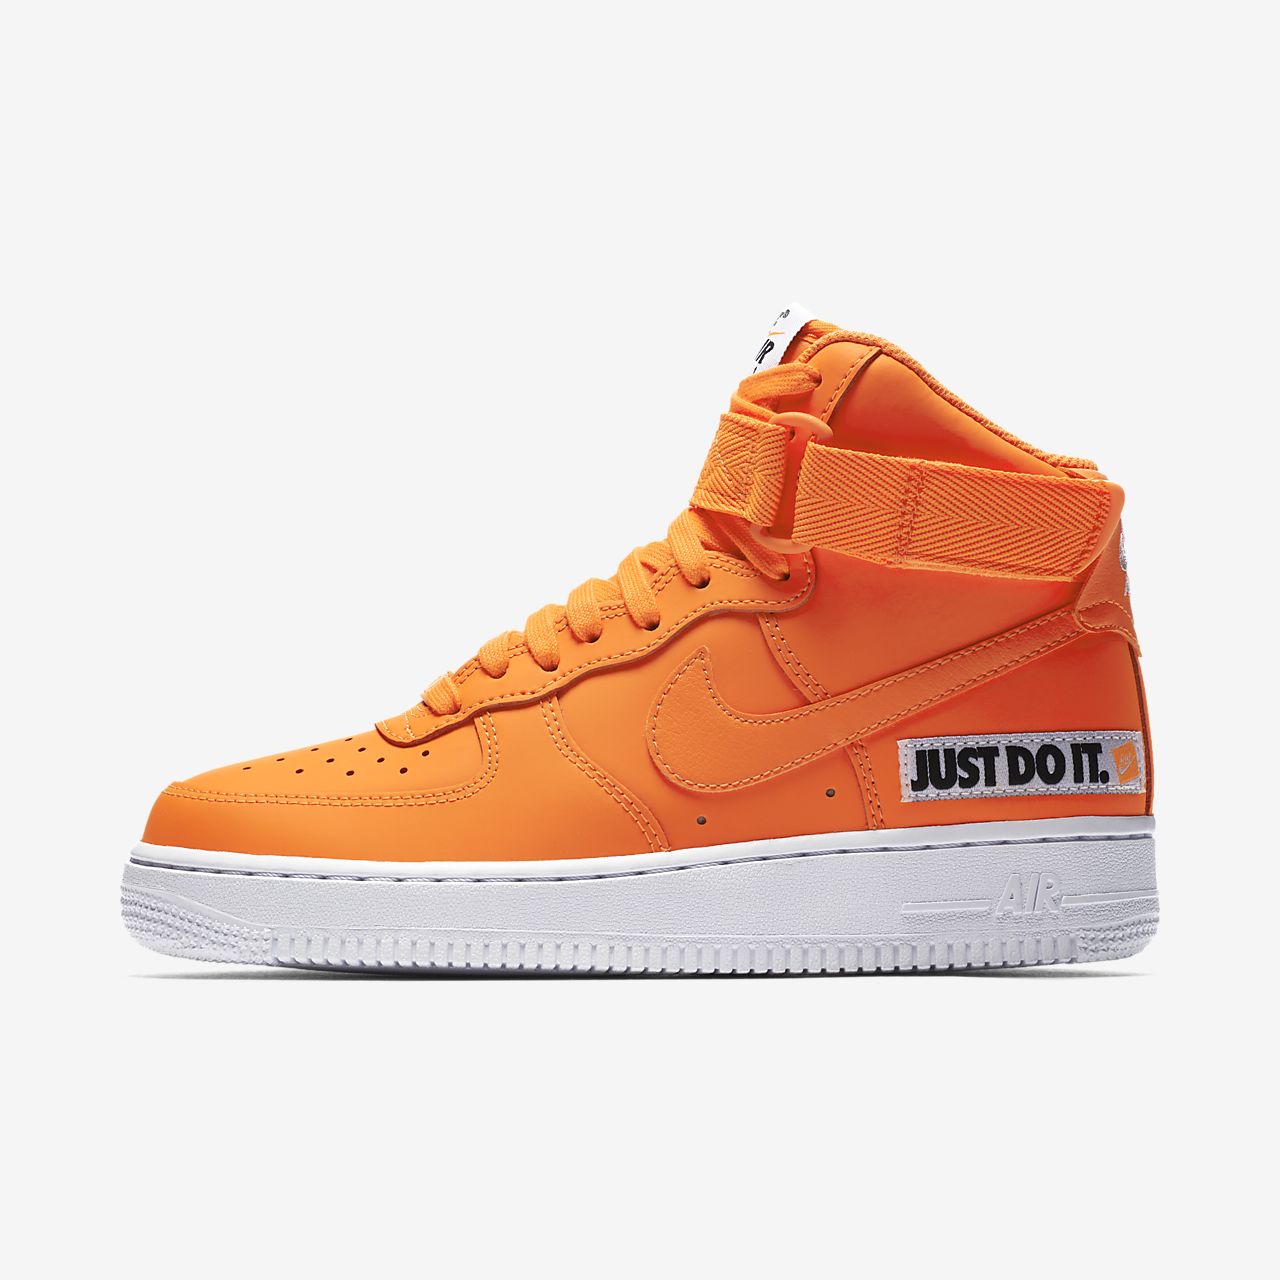 Chaussure Nike Air Force 1 High LX Leather pour Femme